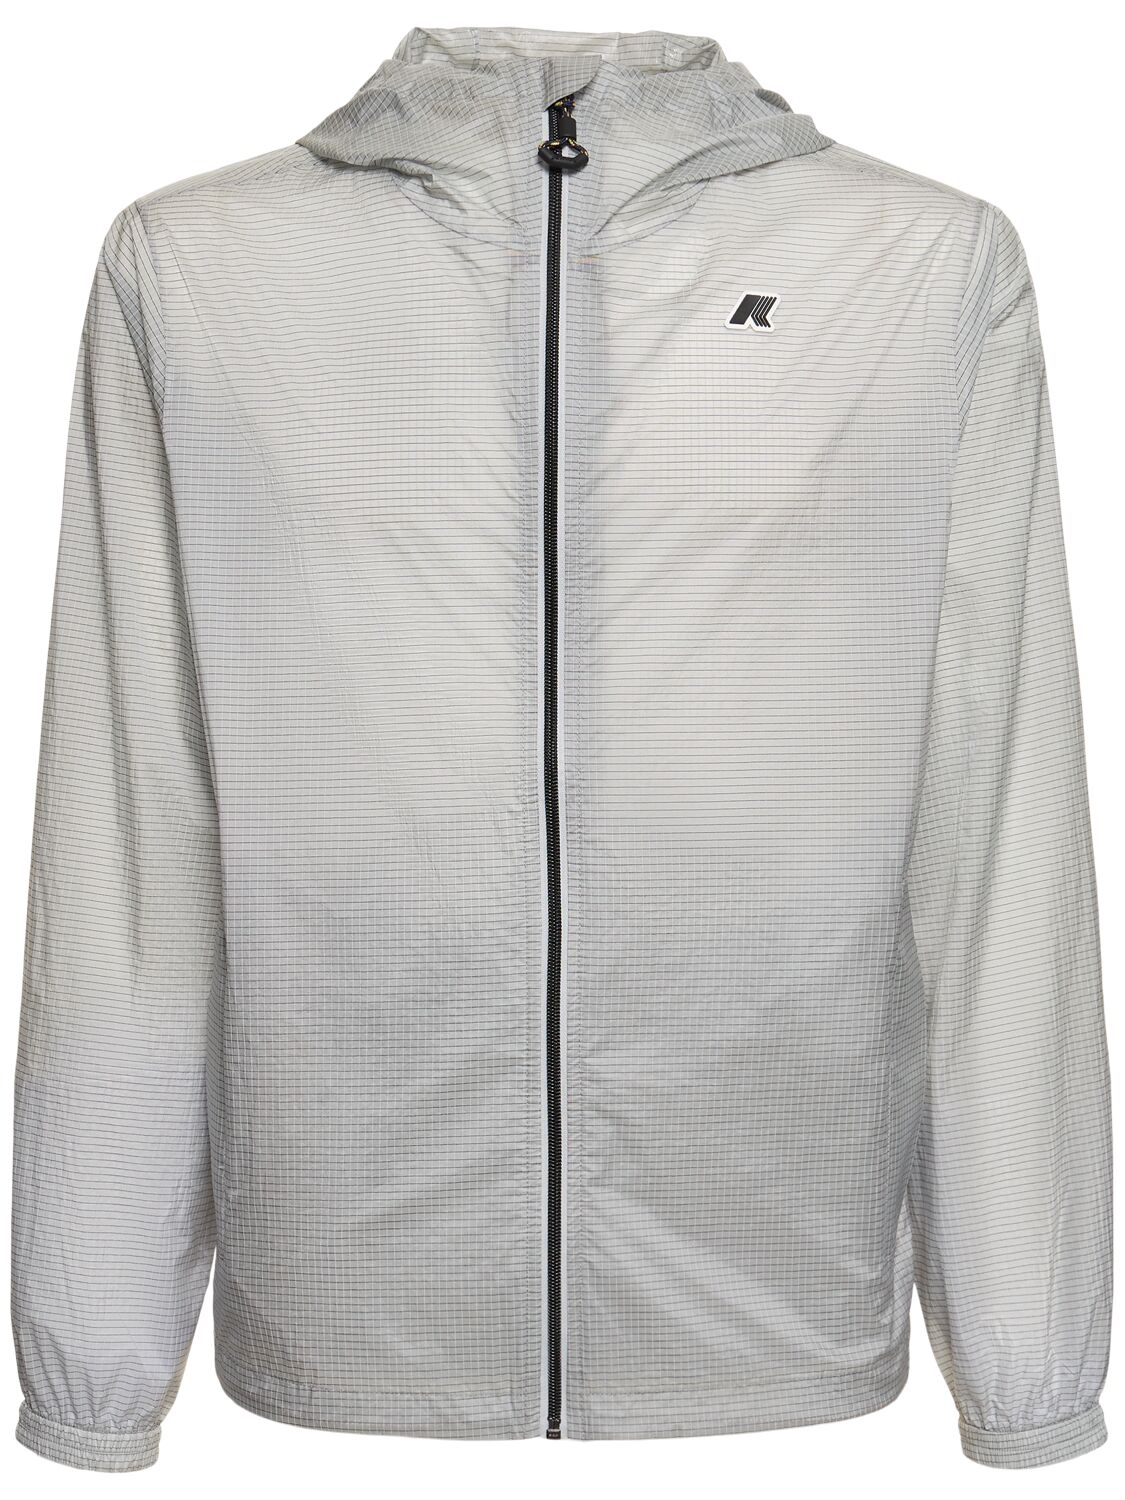 Image of Cleon Ripstop Jacket